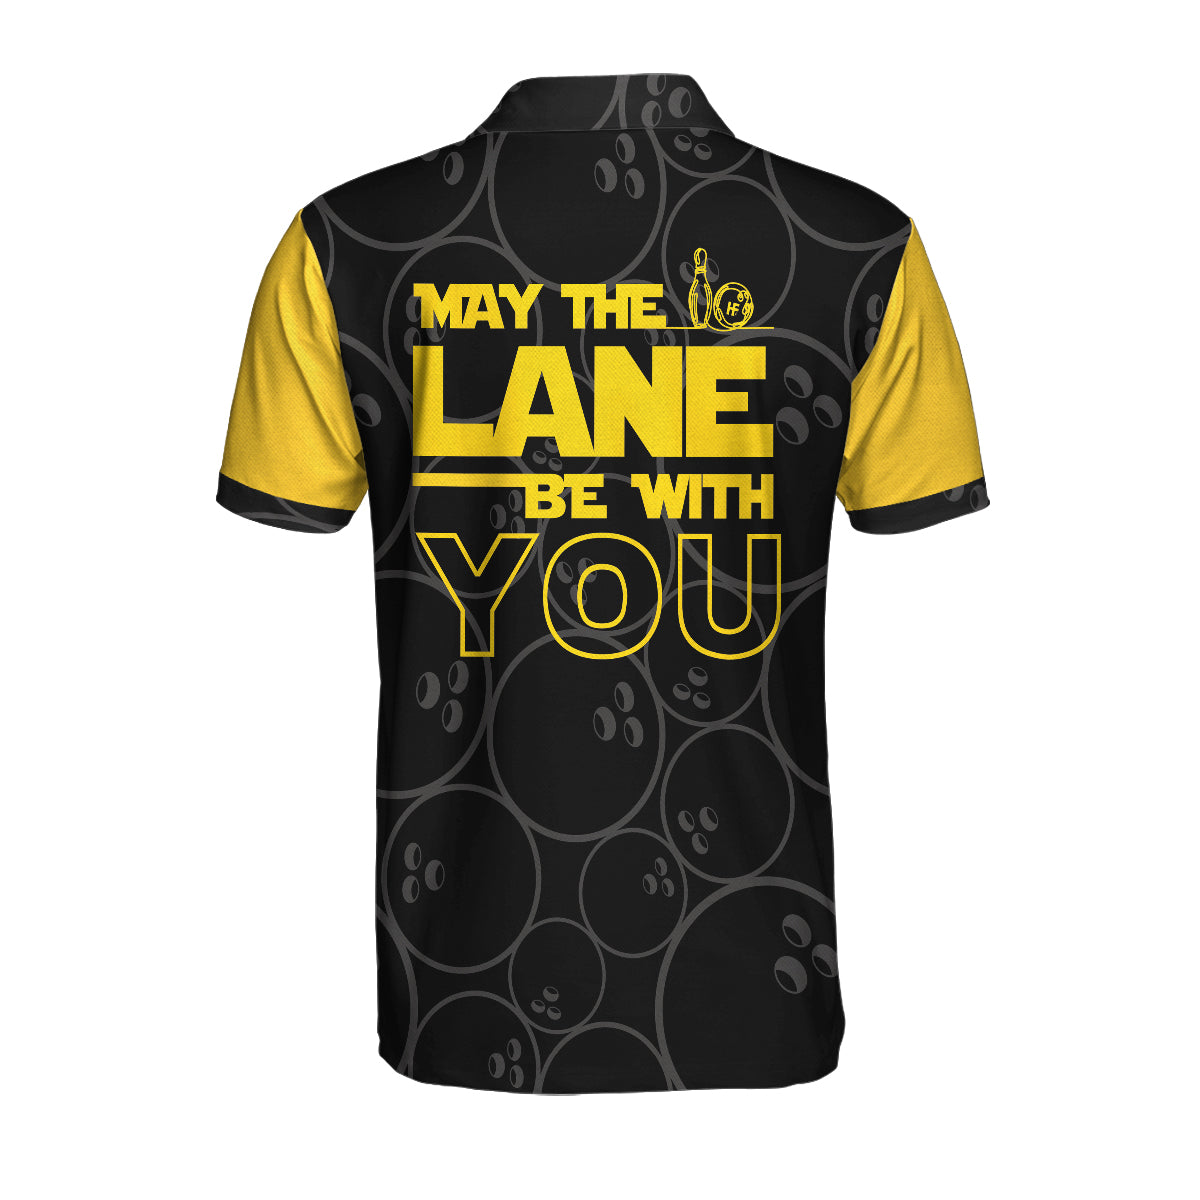 May The Lane Be With You Polo Shirt/ Black And Yellow Bowling Ball Pattern Shirt/ Funny Sayings Shirt Coolspod